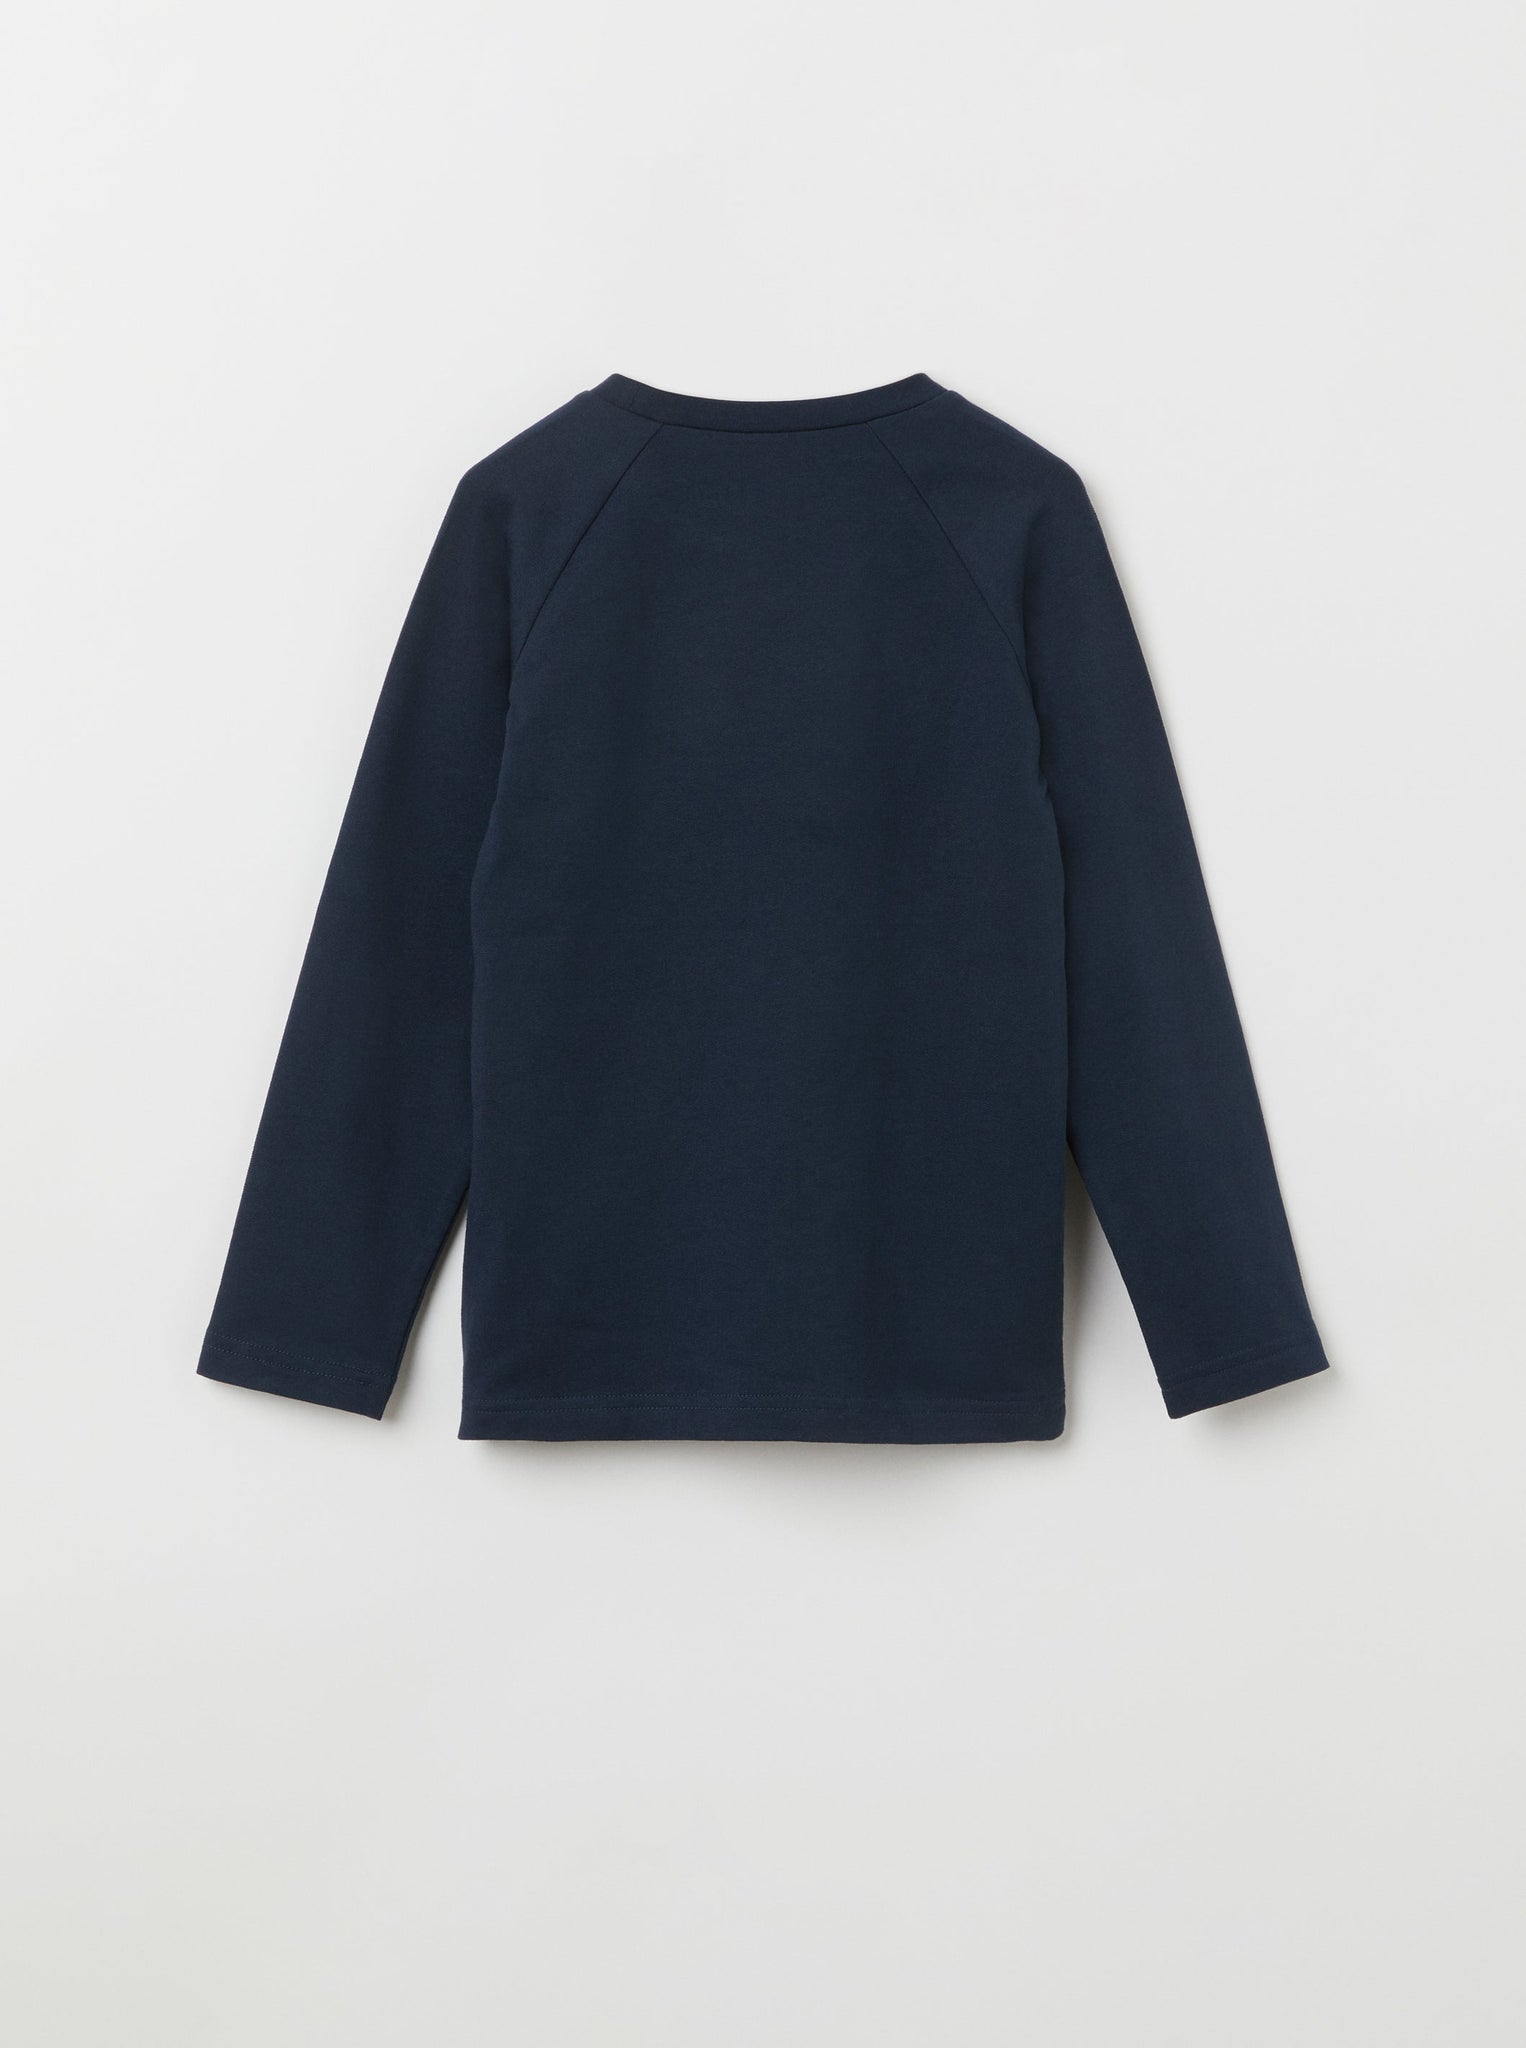 Navy Skateboard Kids Sweatshirt from the Polarn O. Pyret kidswear collection. Nordic kids clothes made from sustainable sources.